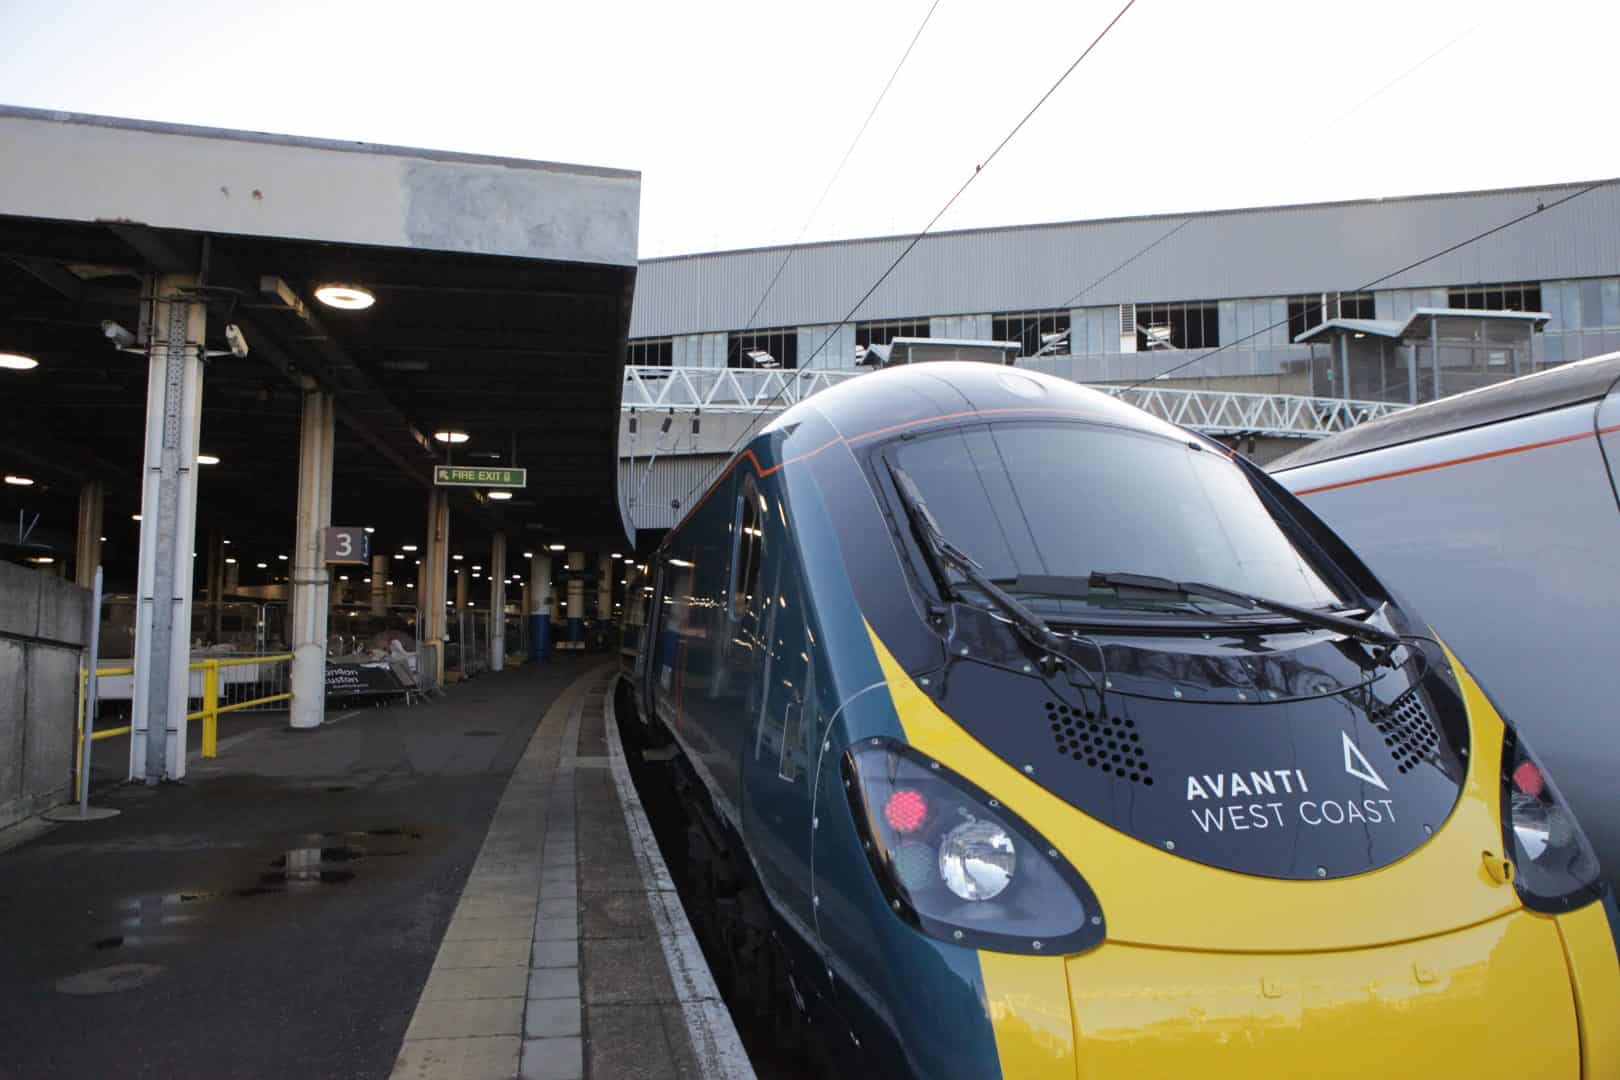 Government to take over all rail franchises for “at least” six months